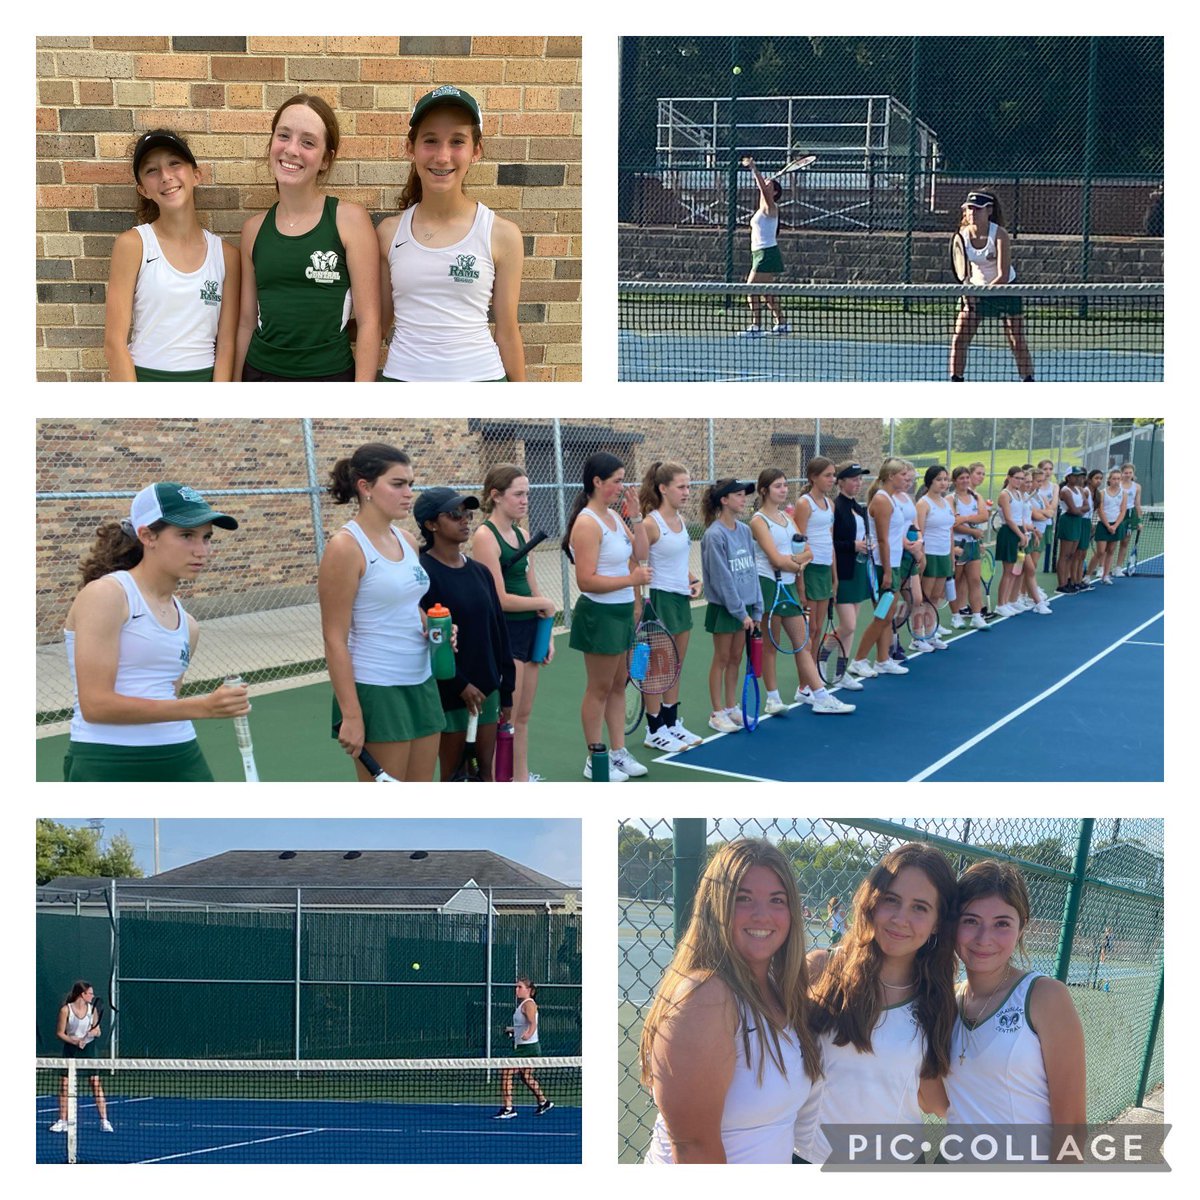 Another round of Dual Matches this week for the Rams! Put up good fights against PR and CG! Let’s keep it going! #RamsLife #Ramily #TennisTime